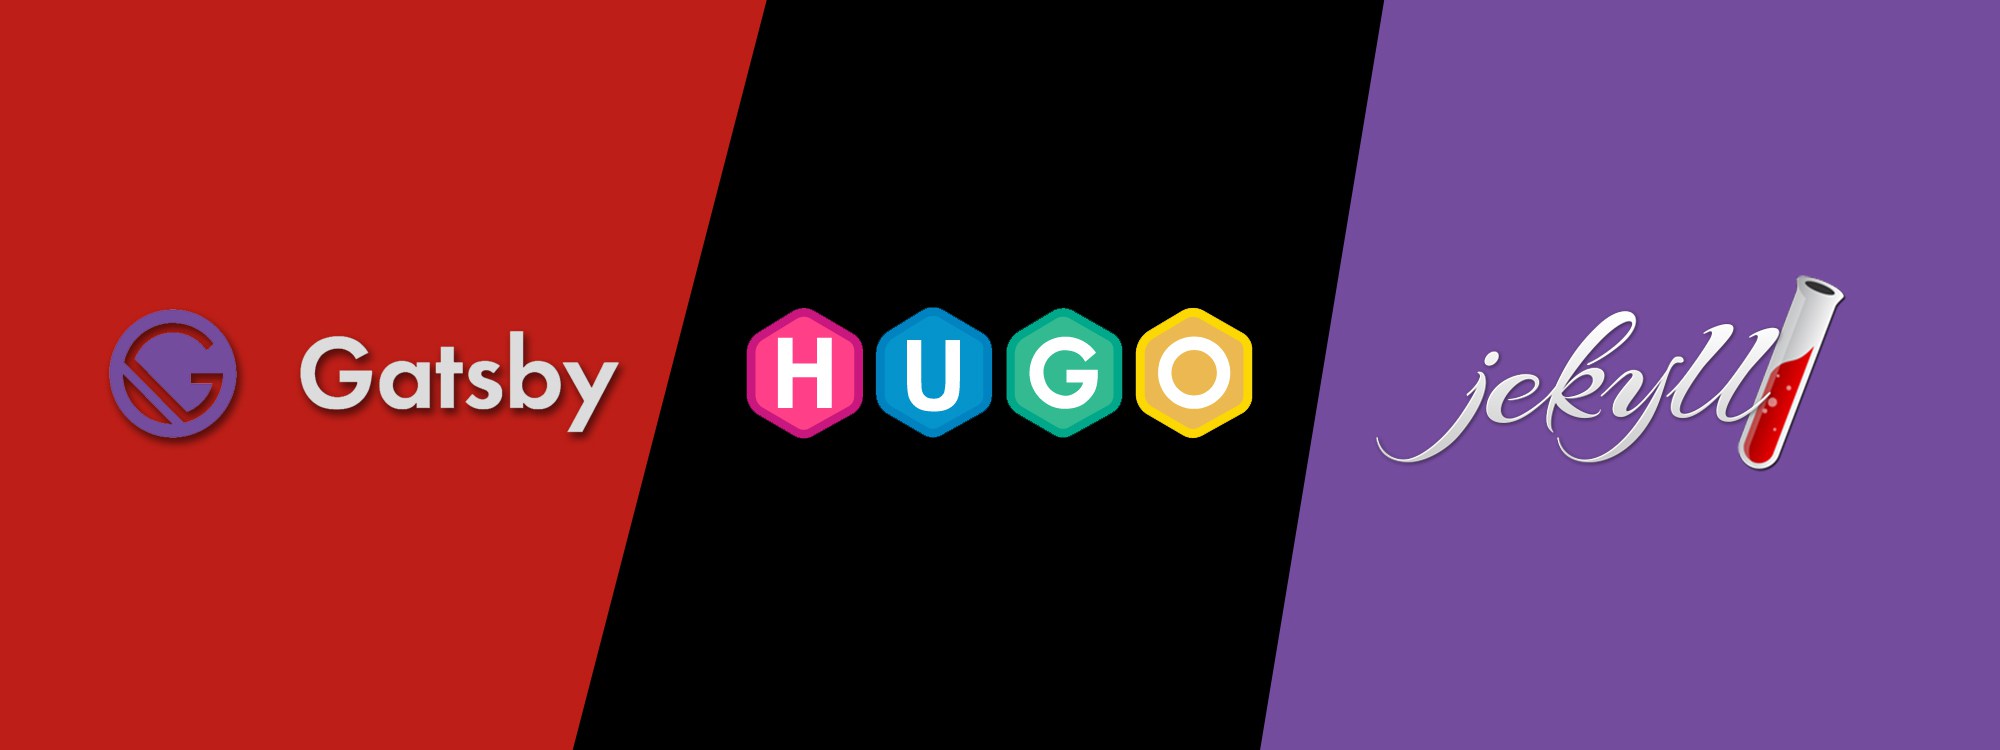 A banner I put together with the logos of the contending static site generators: Gatsby, Hugo, and Jekyll